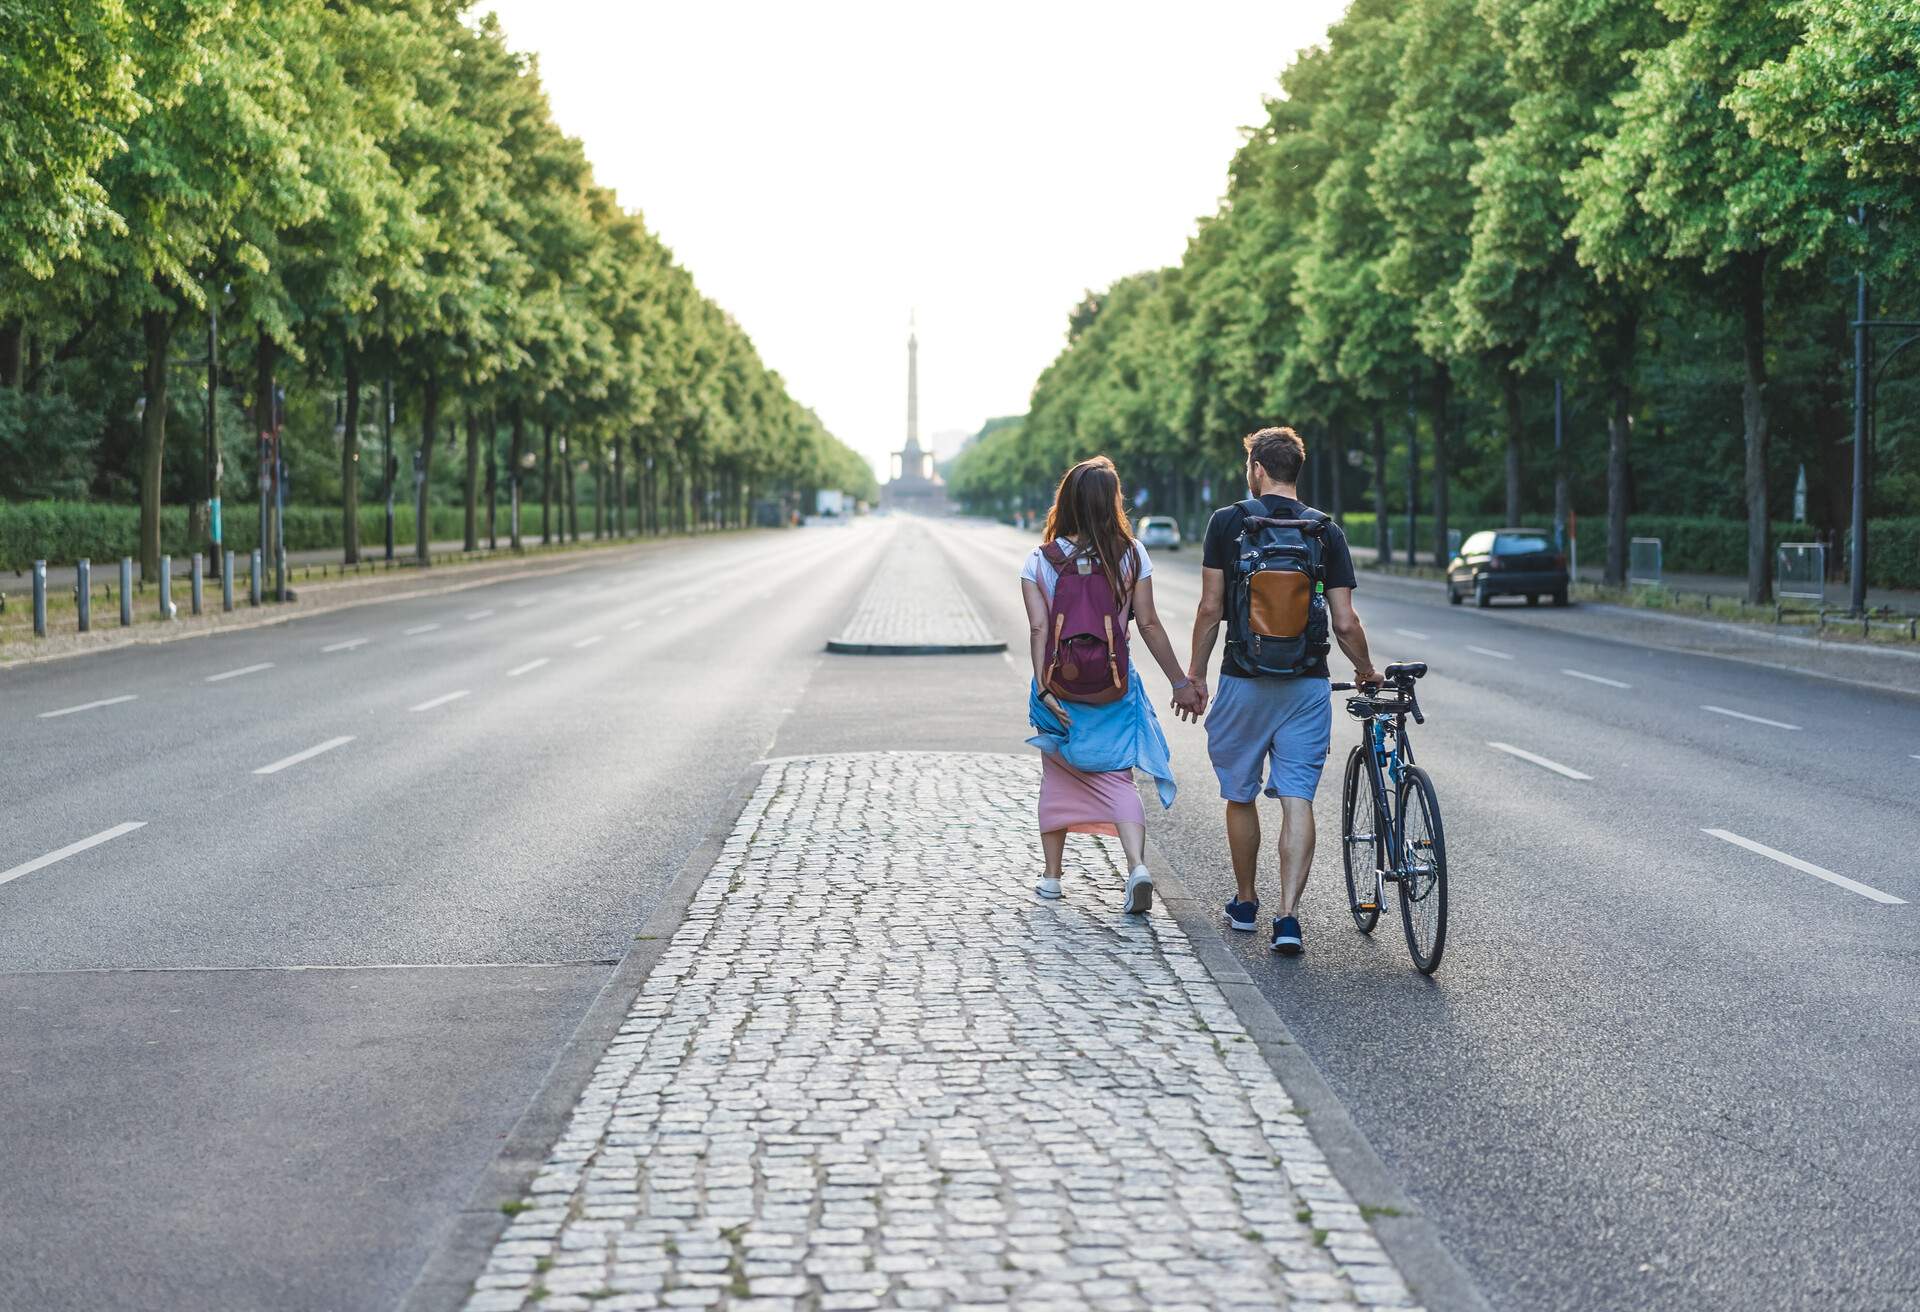 A couple with a bicycle walks hand in hand in the middle of a street lined with tall green trees.